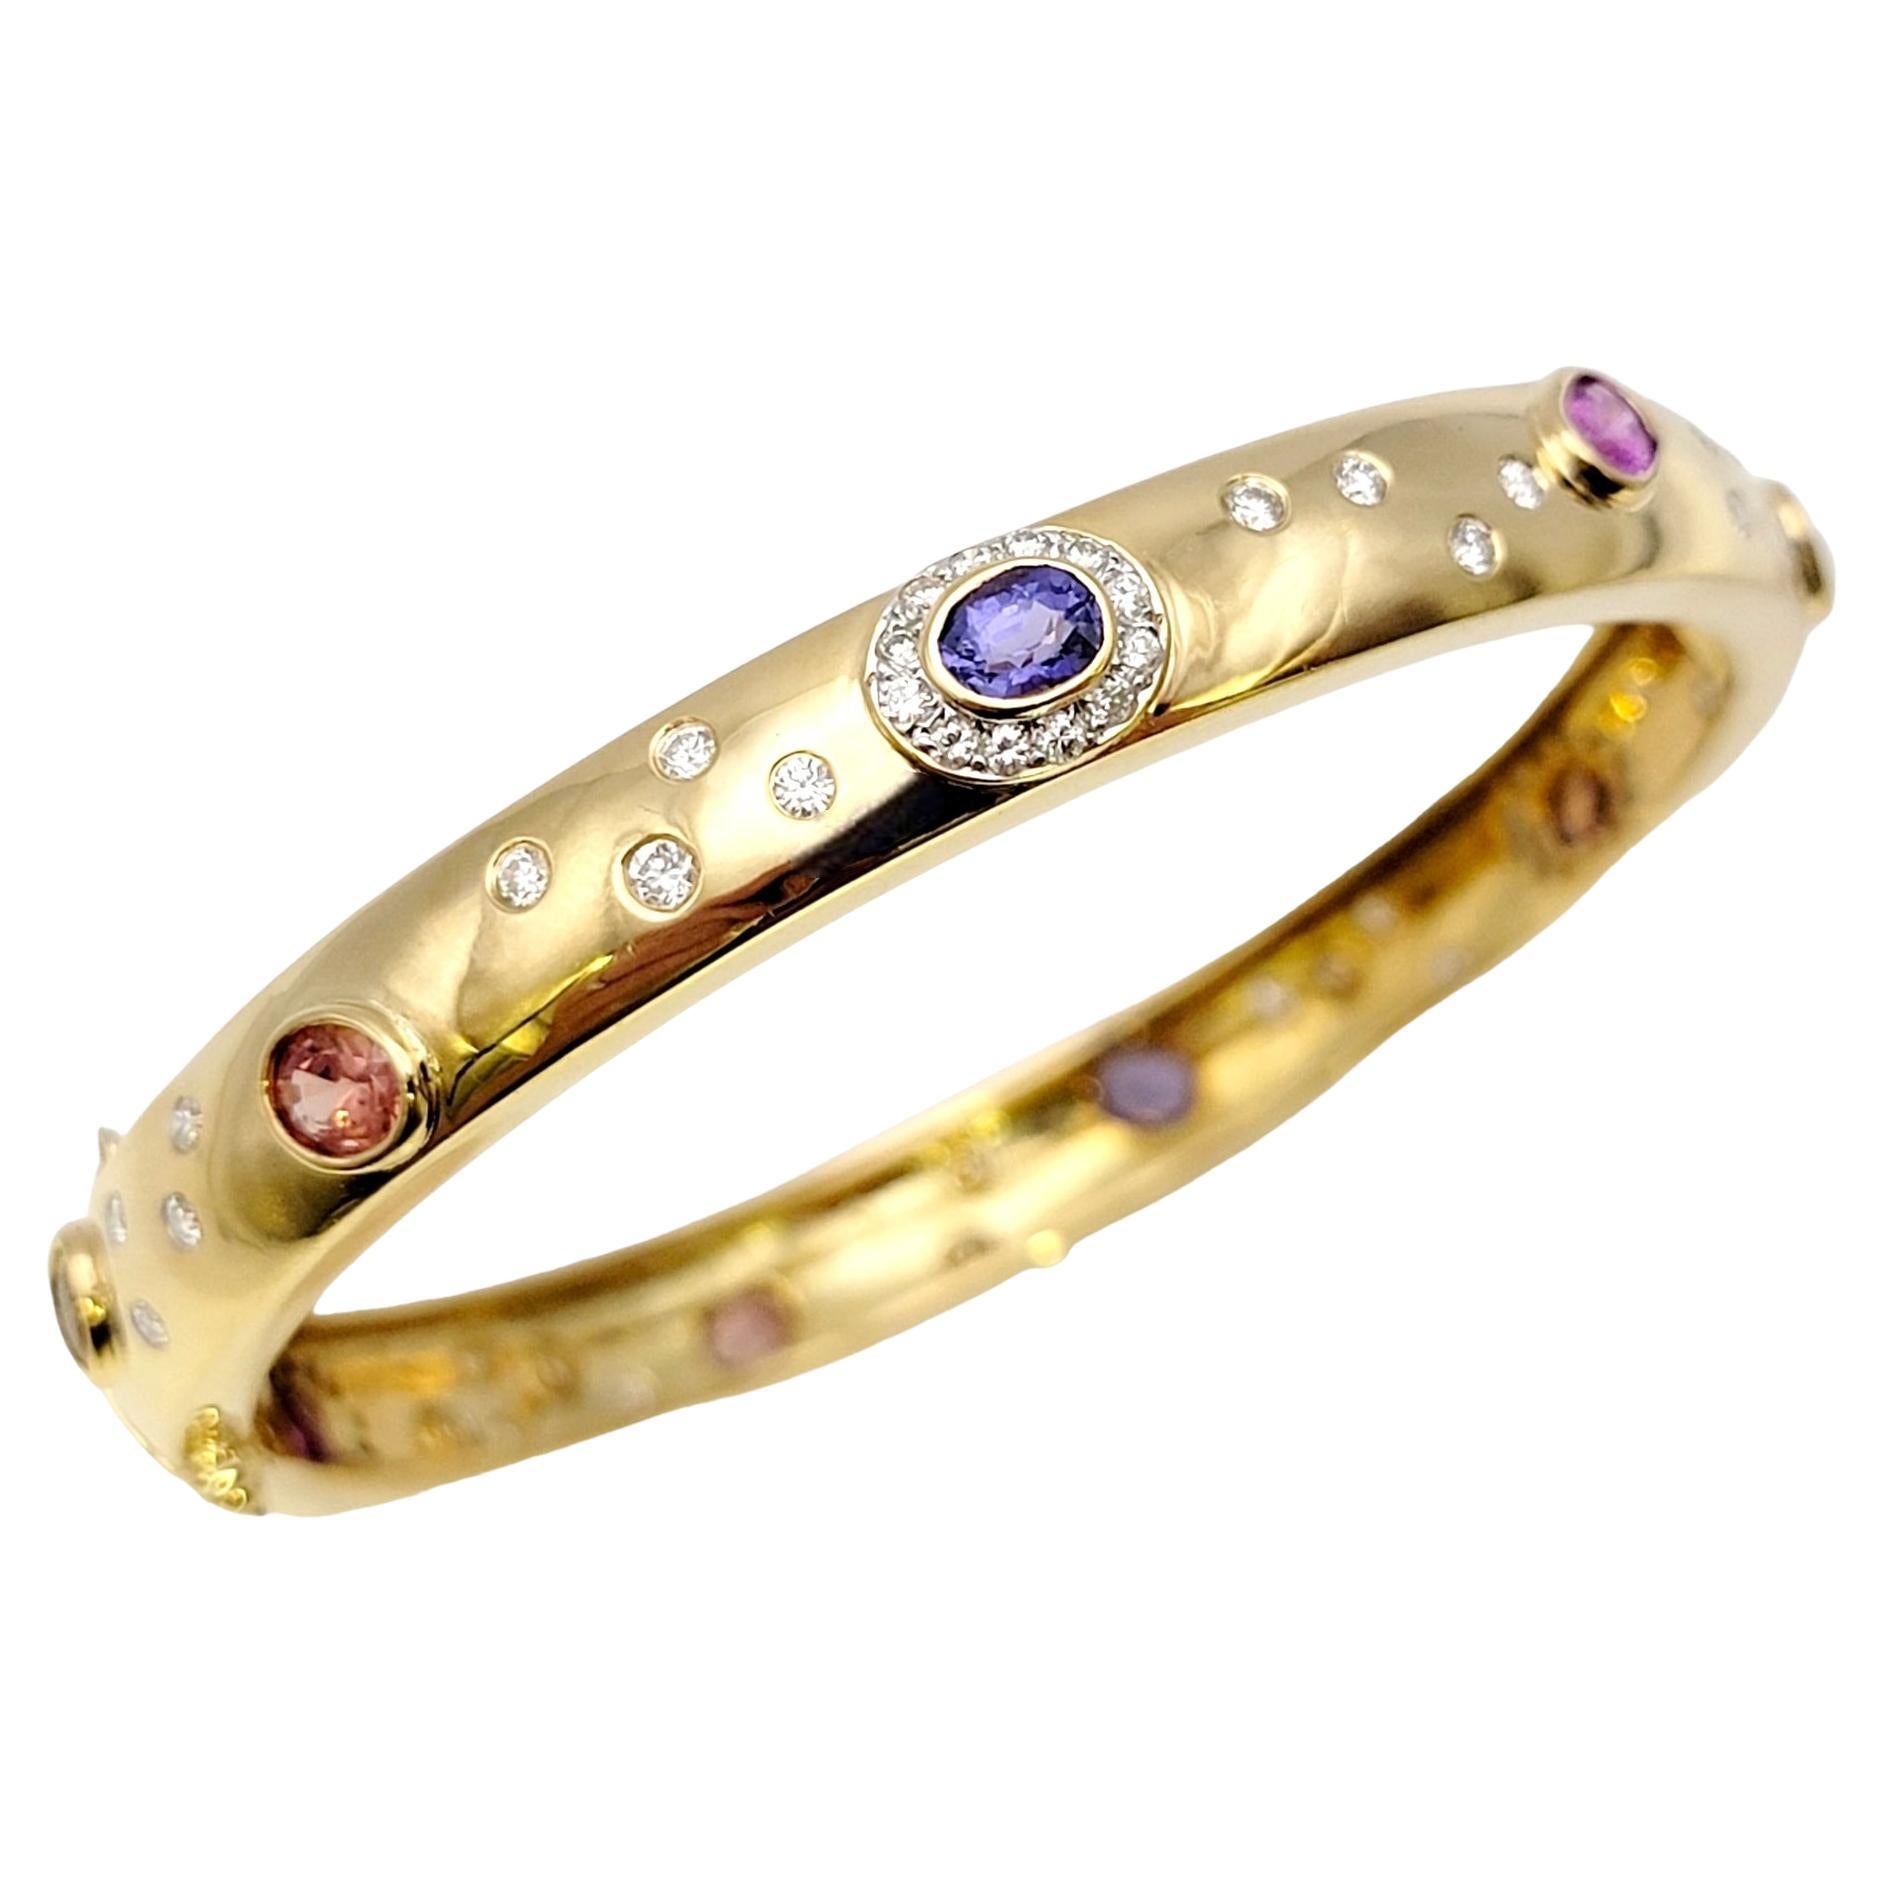 5.62 Carat Total Multi-Colored Sapphire and Diamond Yellow Gold Bangle Bracelet For Sale